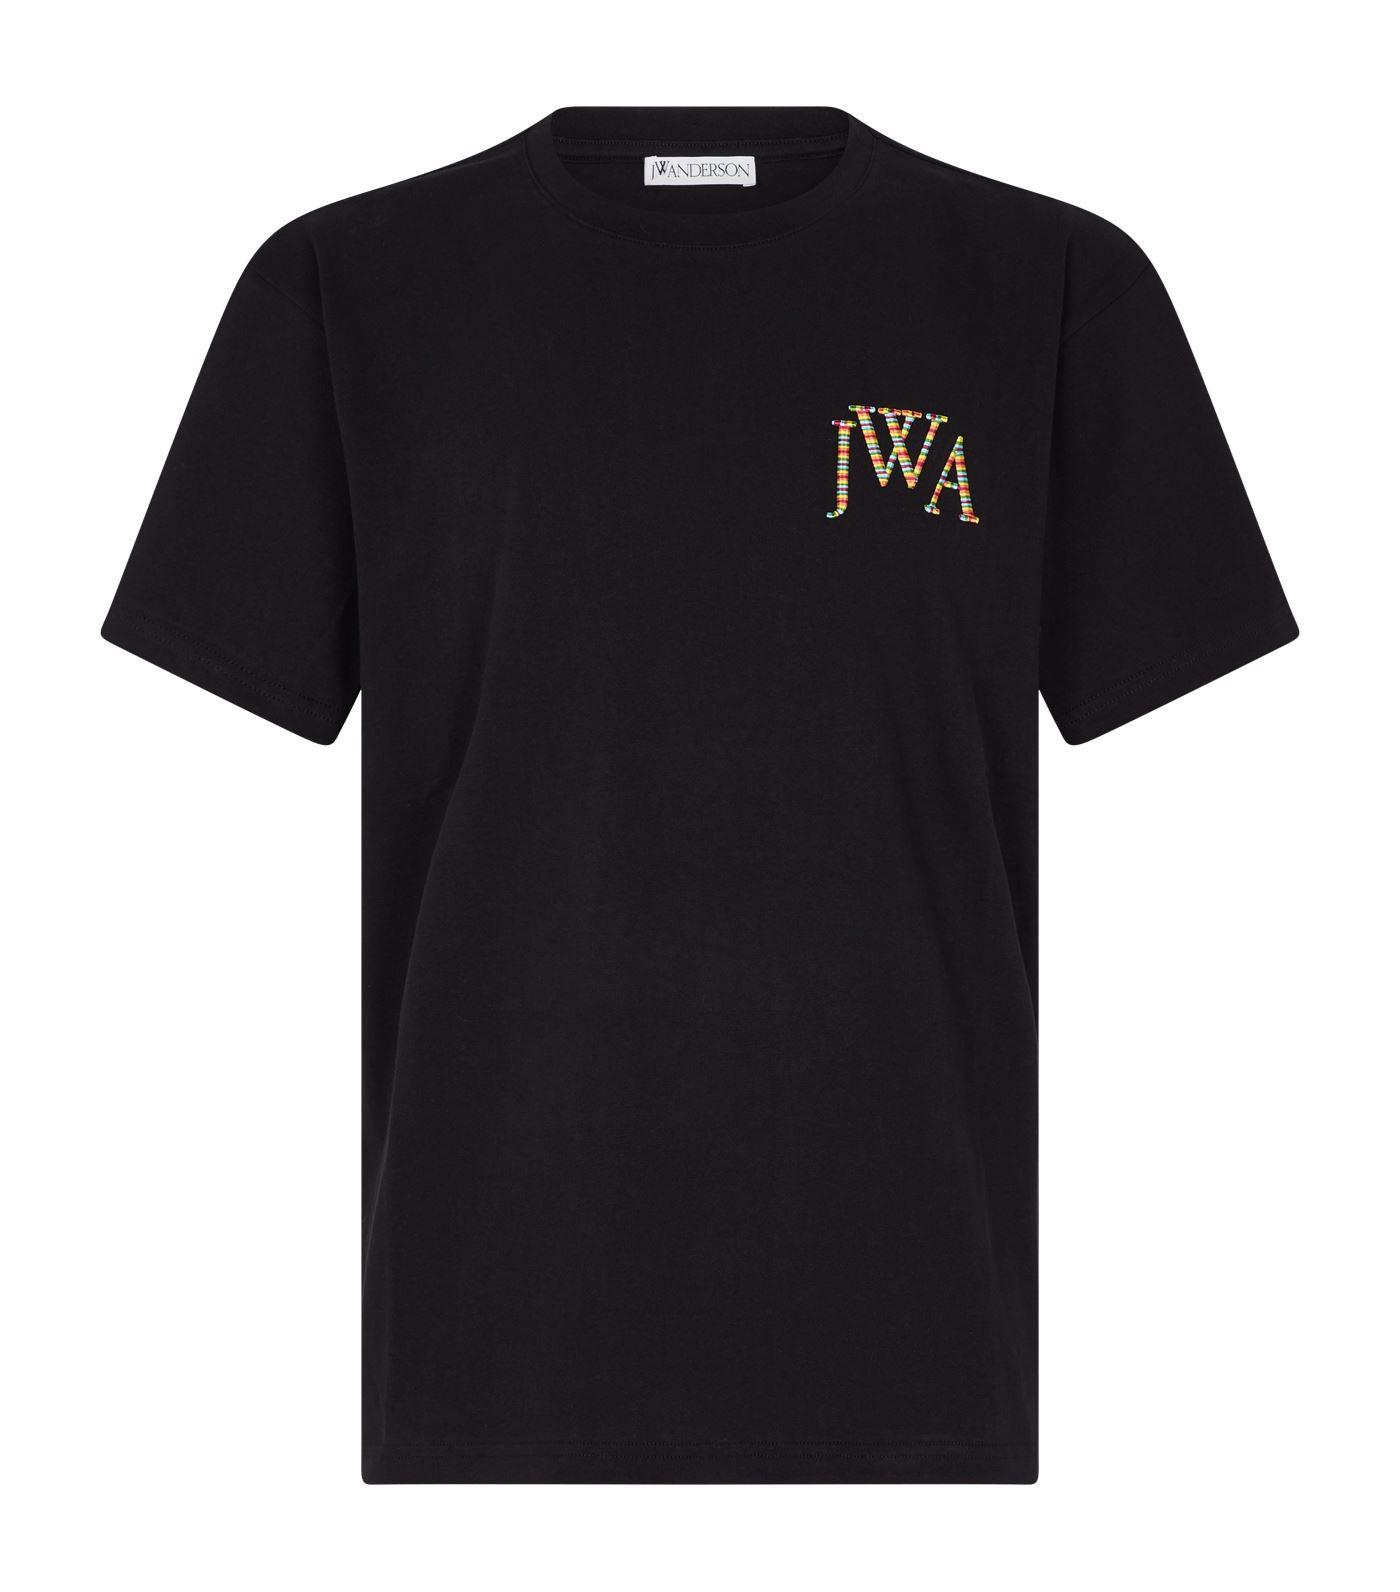 JW Anderson Embroidered Logo T-shirt in Black for Men - Lyst